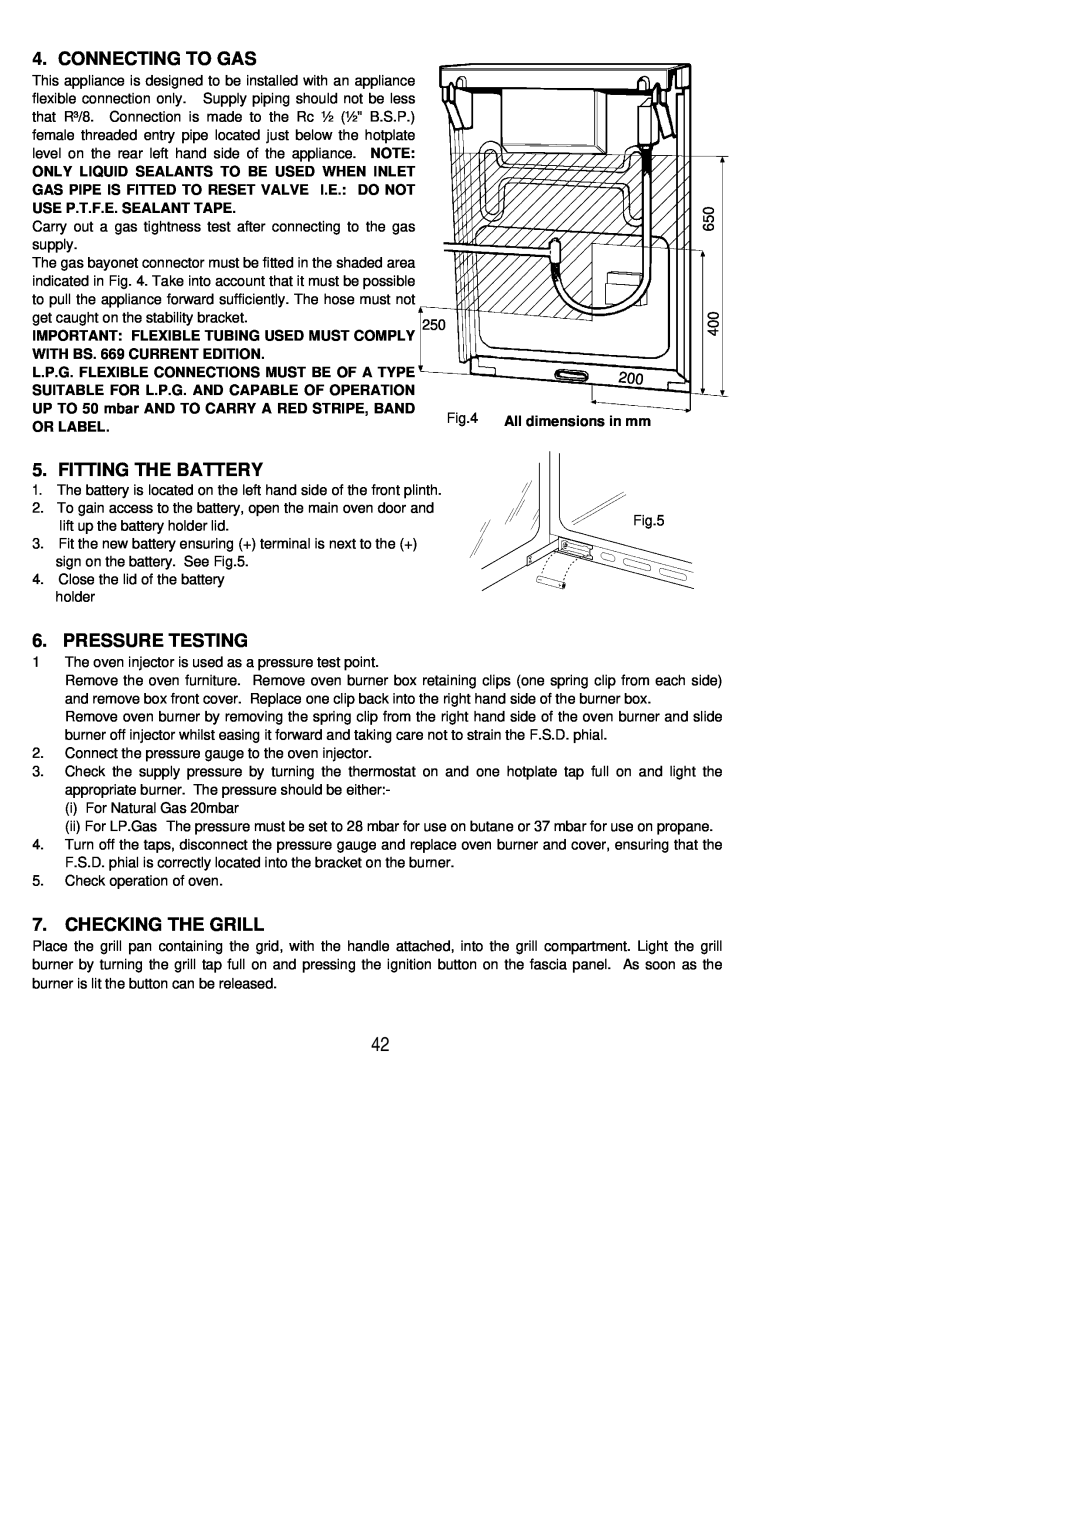 Electrolux SG 332 installation instructions Connecting To Gas, Fitting The Battery, Pressure Testing, Checking The Grill 